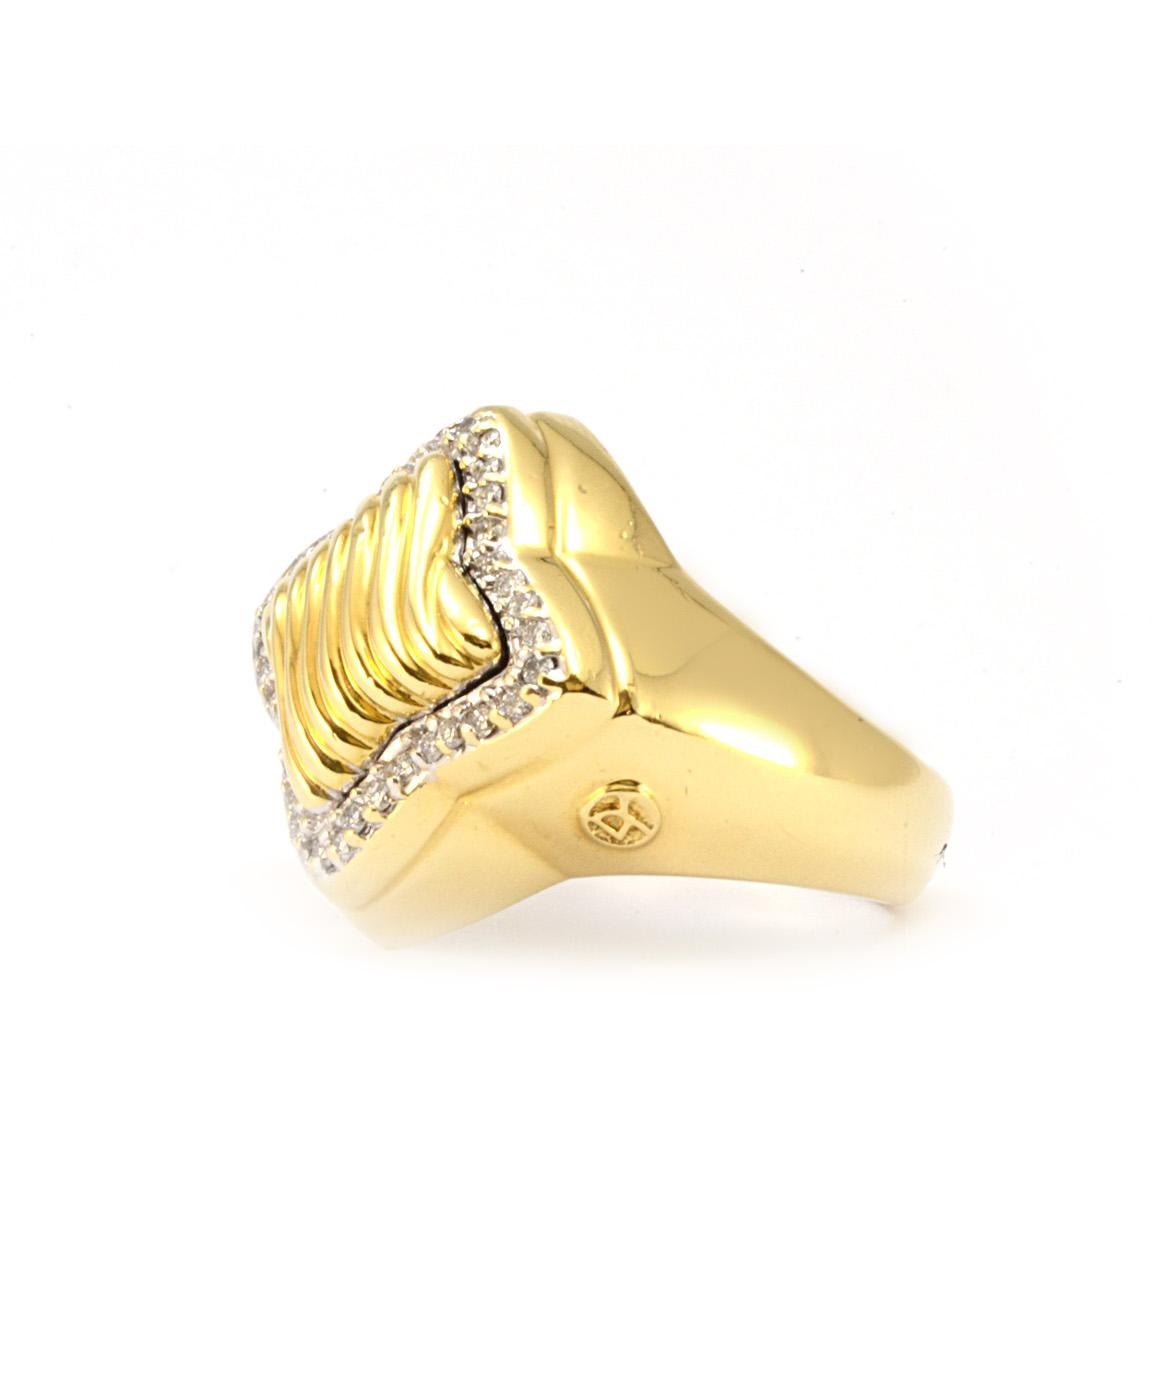 100% Authentic David Yurman 18K Yellow Gold Natural Diamond Ring in Excellent Condition! This beautiful yellow gold ring is a size 7 1/4, and weighs 16.2 grams. Approximately 3/4 inch x 3/4 inch. This ring has about 40 diamonds around it,